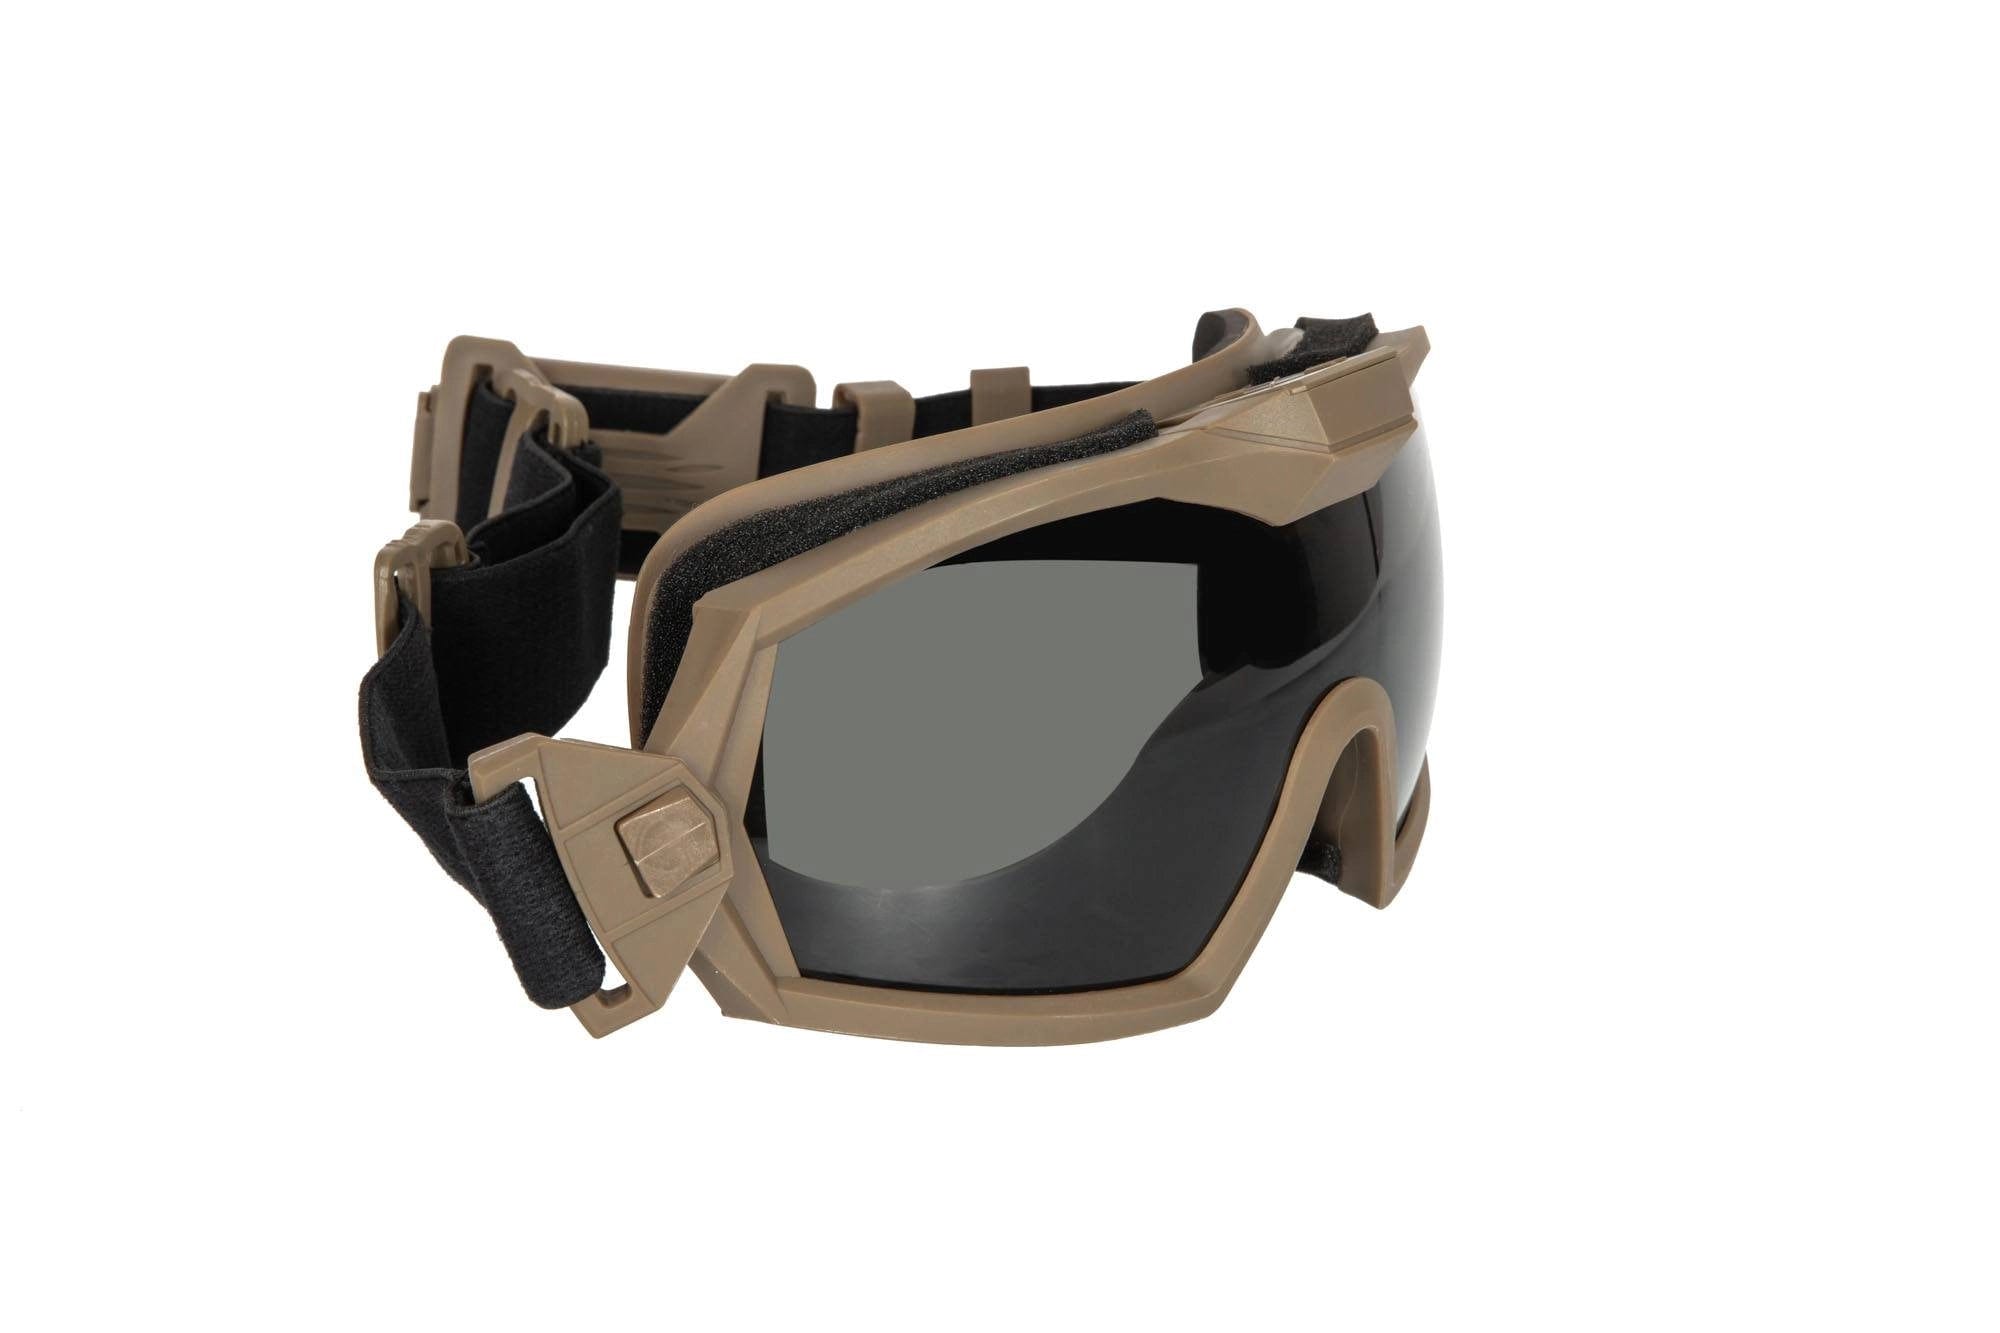 Tactical Goggles with Fan - Tan